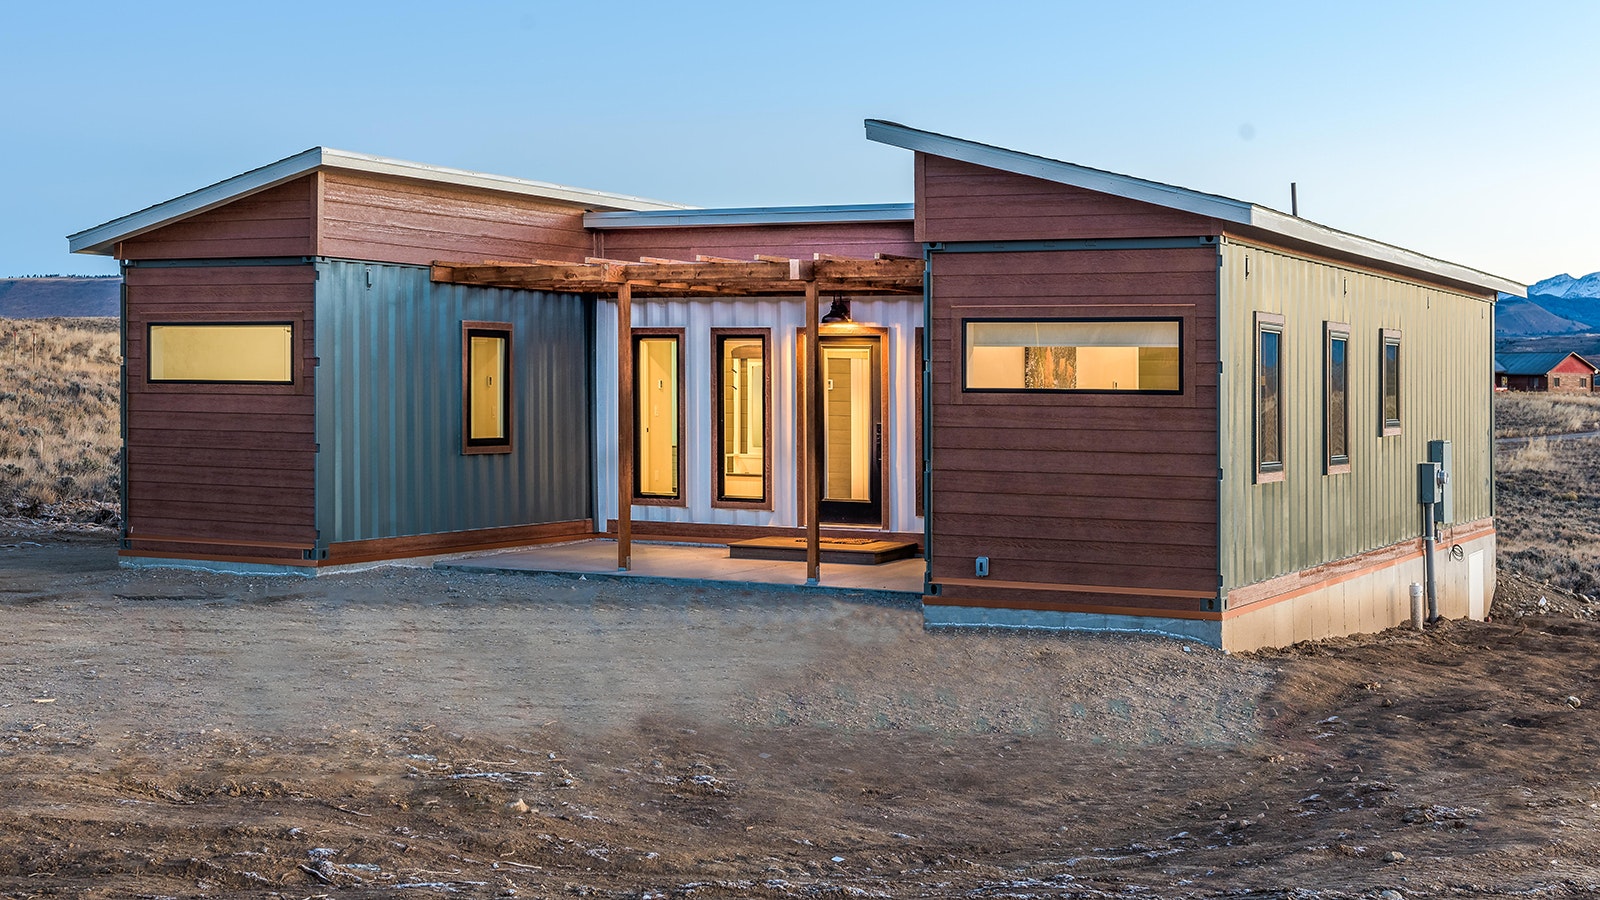 This 800-square-foot home is built from three steel shipping containers in an H configuration.